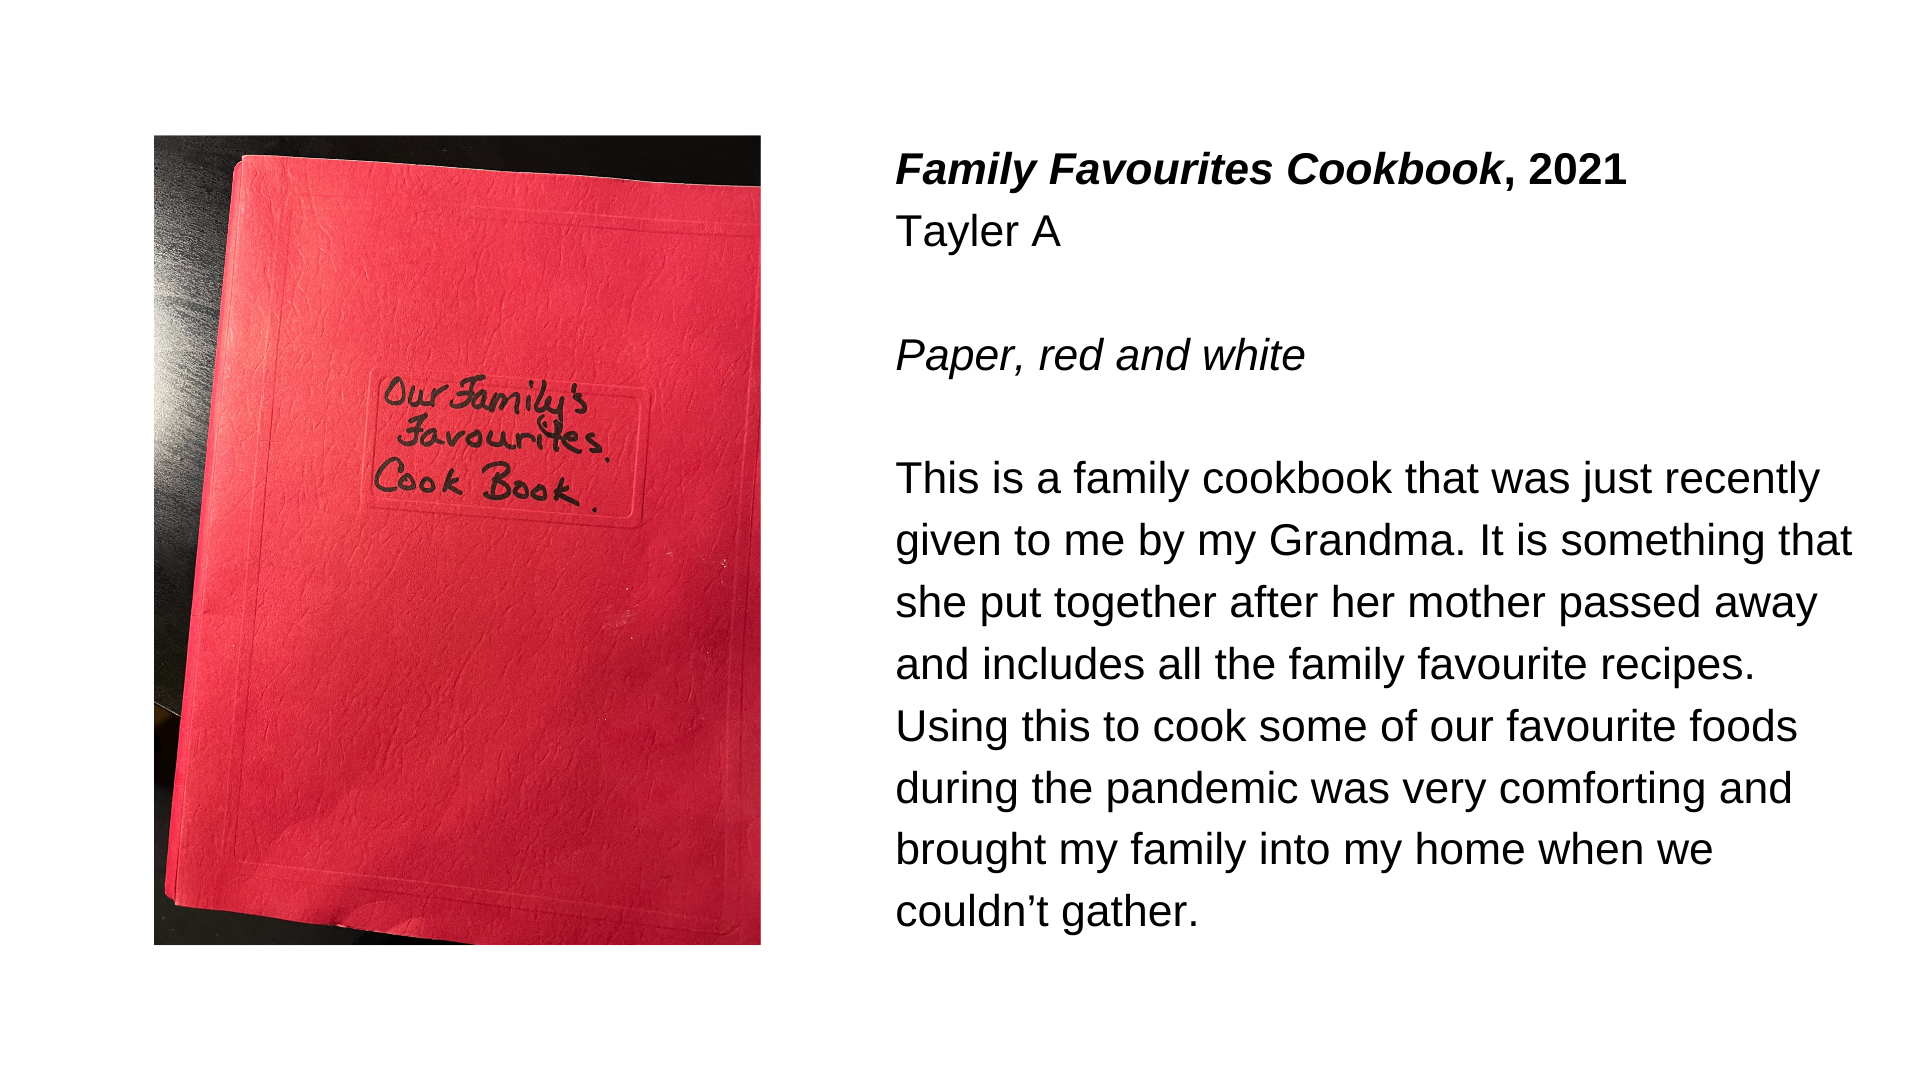  The cover of a red folder with the words “Our Family’s Favourites Cook Book” written on it in black marker. Next to this image, the words “Family Favourites Cookbook, 2021. Paper, red and white. This is a family cookbook that was just recently given